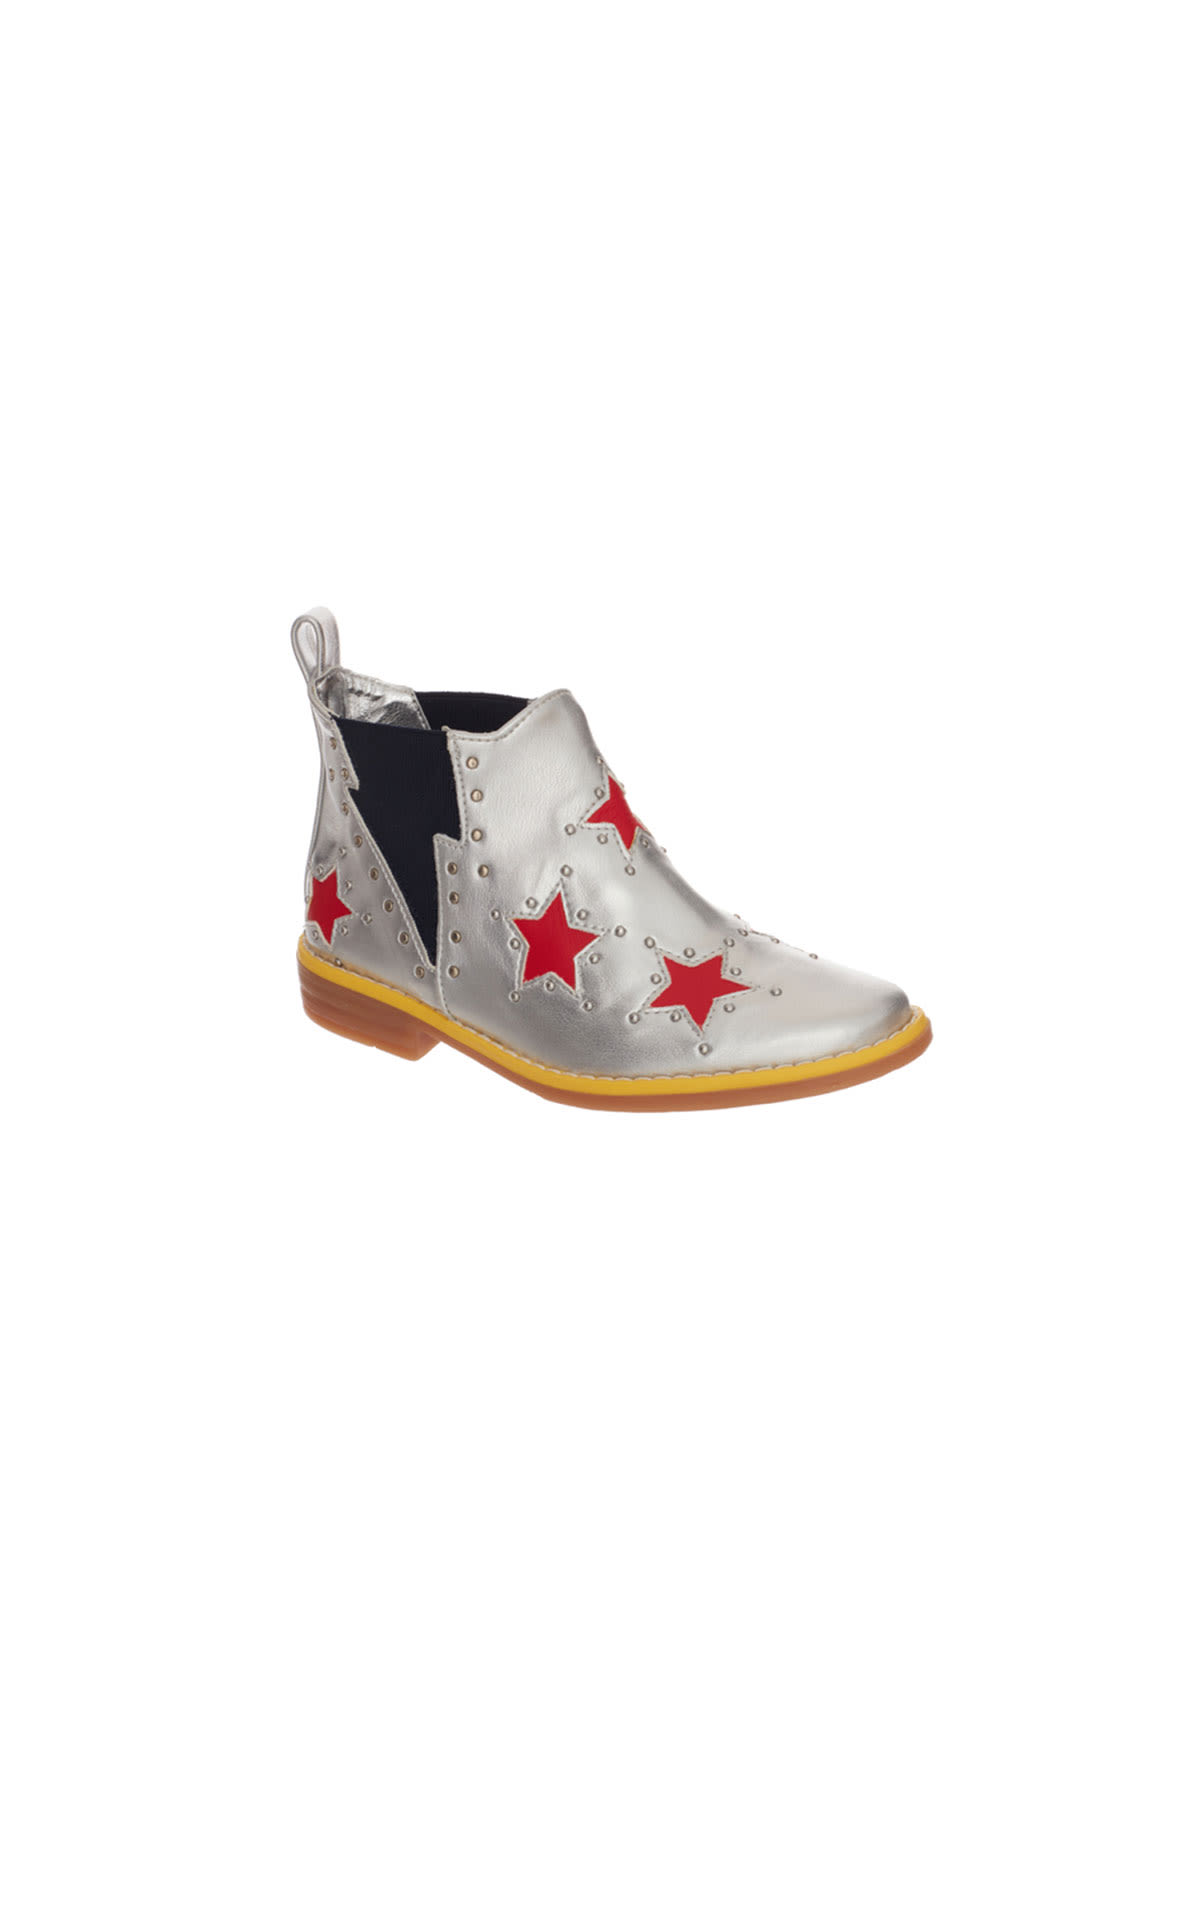 Stella McCartney Silver boots with red star from Bicester Village